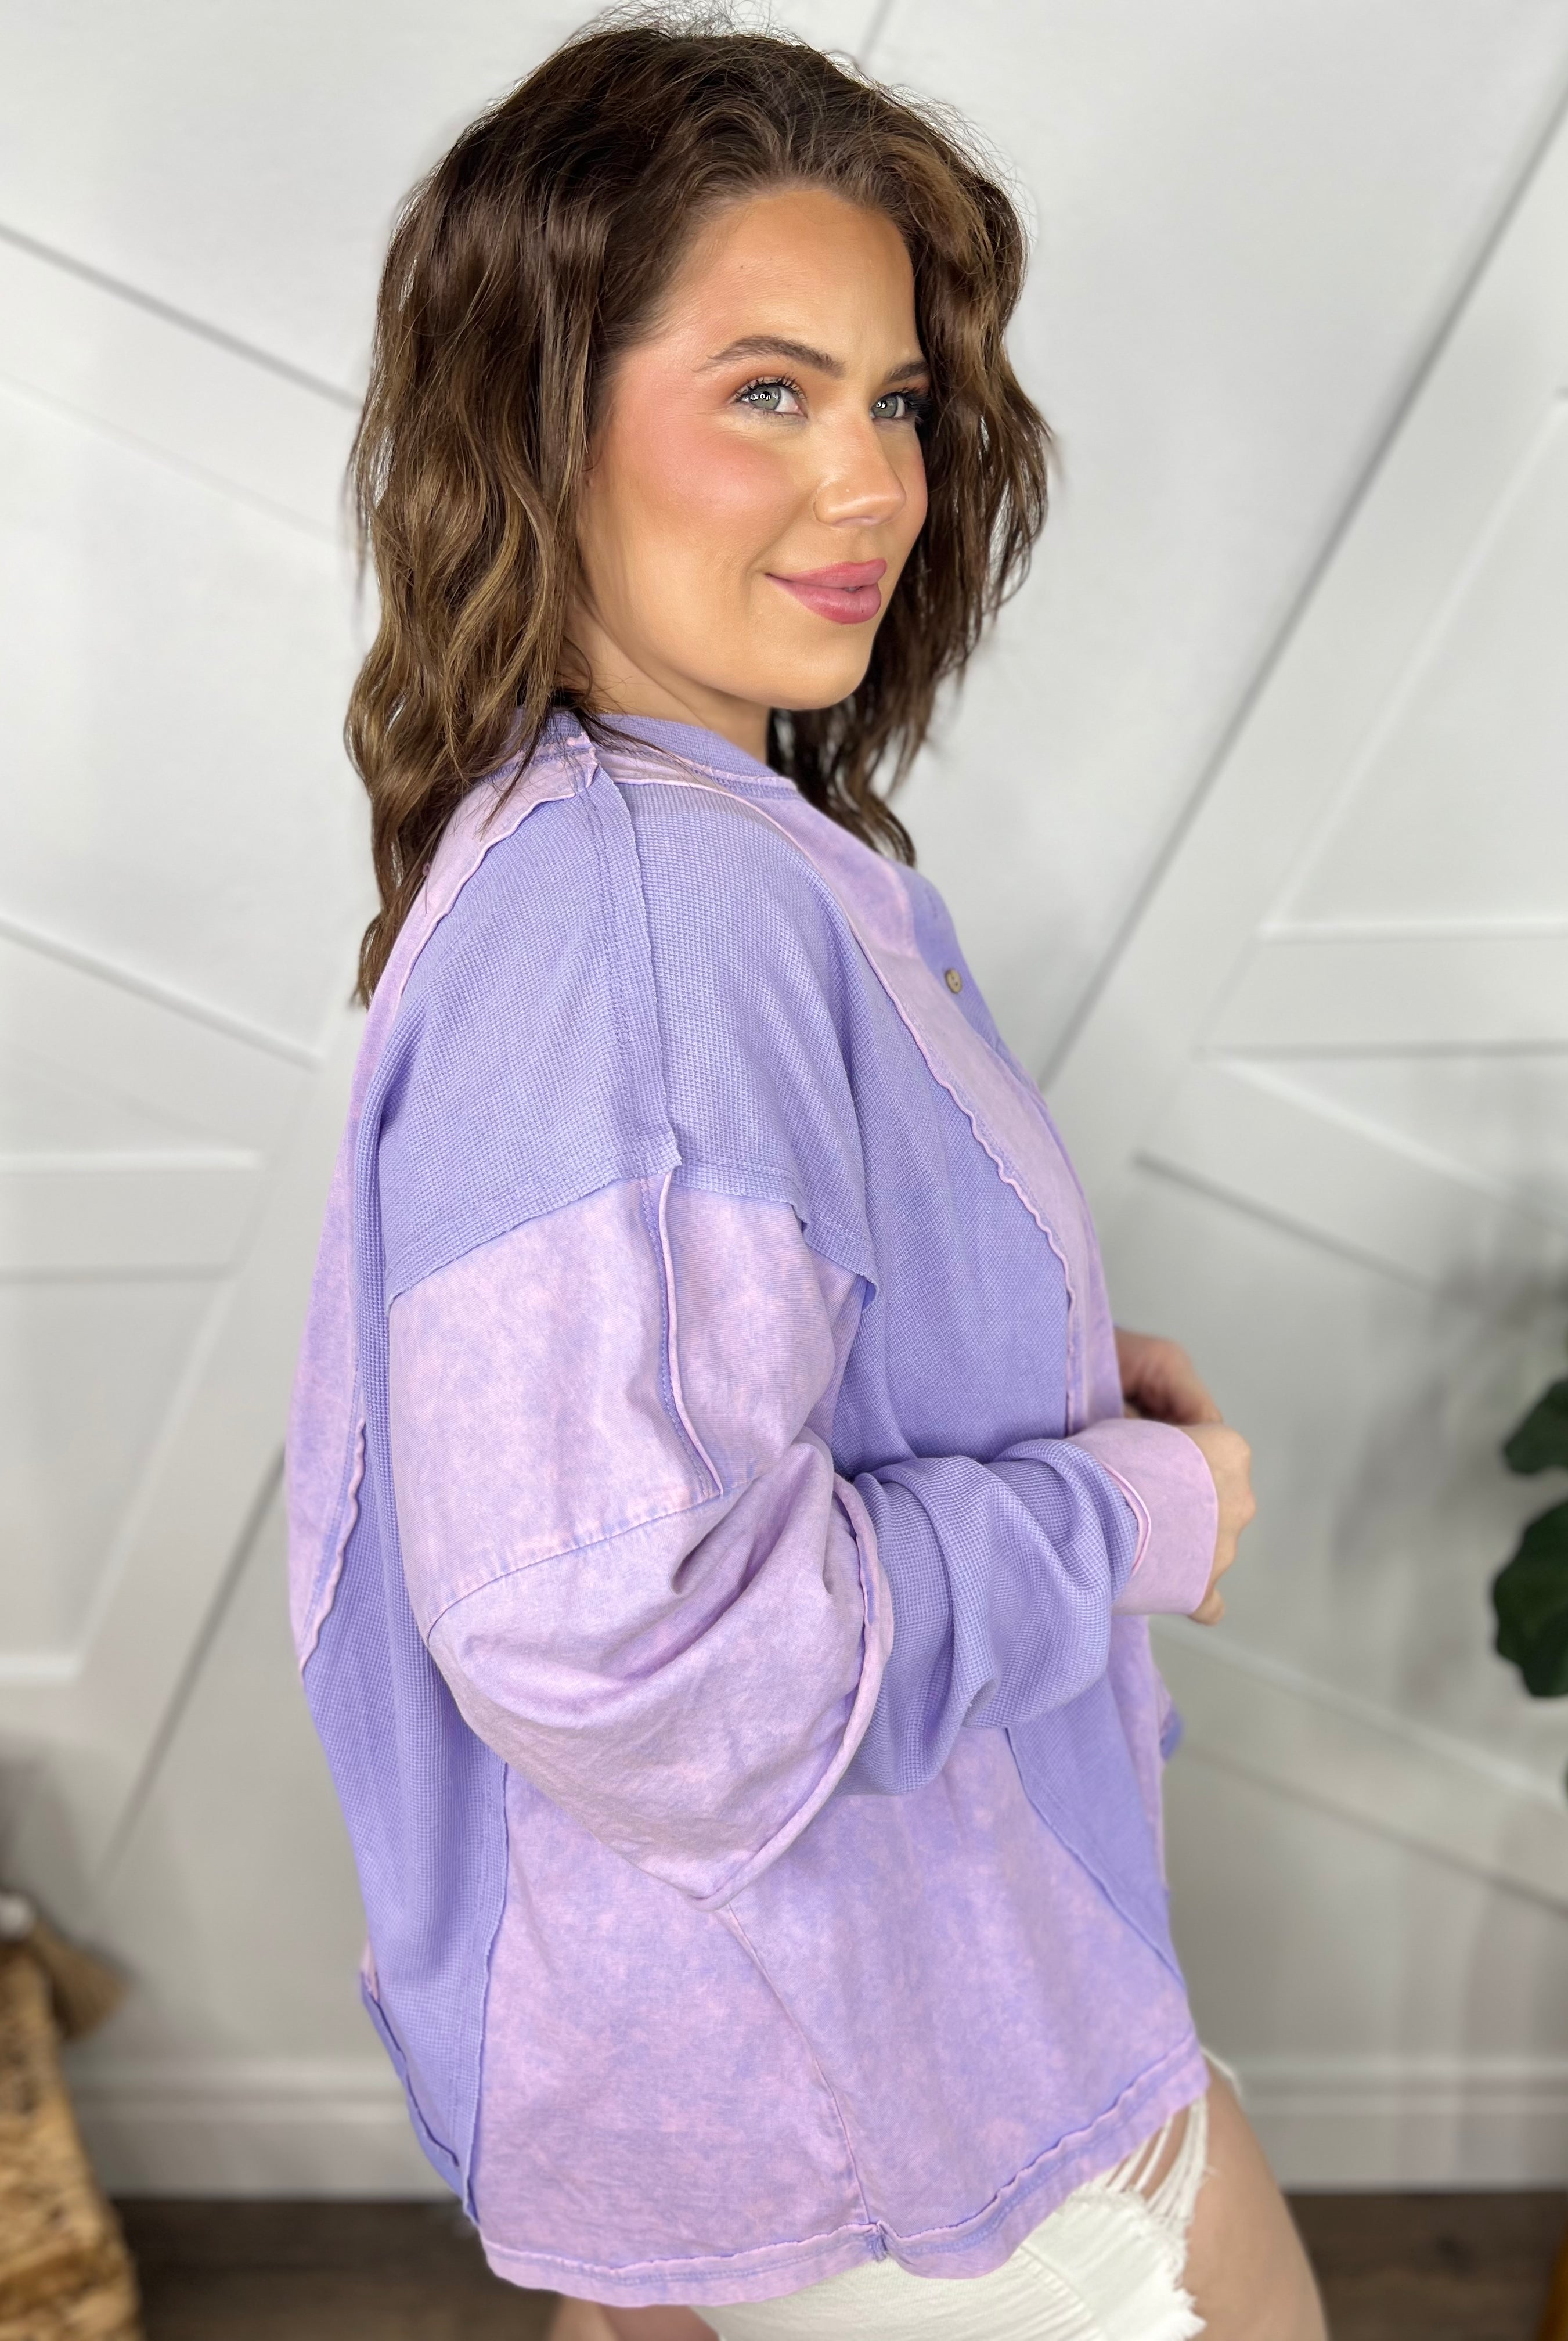 Winner Long Sleeve Top-120 Long Sleeve Tops-Oli & Hali-Heathered Boho Boutique, Women's Fashion and Accessories in Palmetto, FL